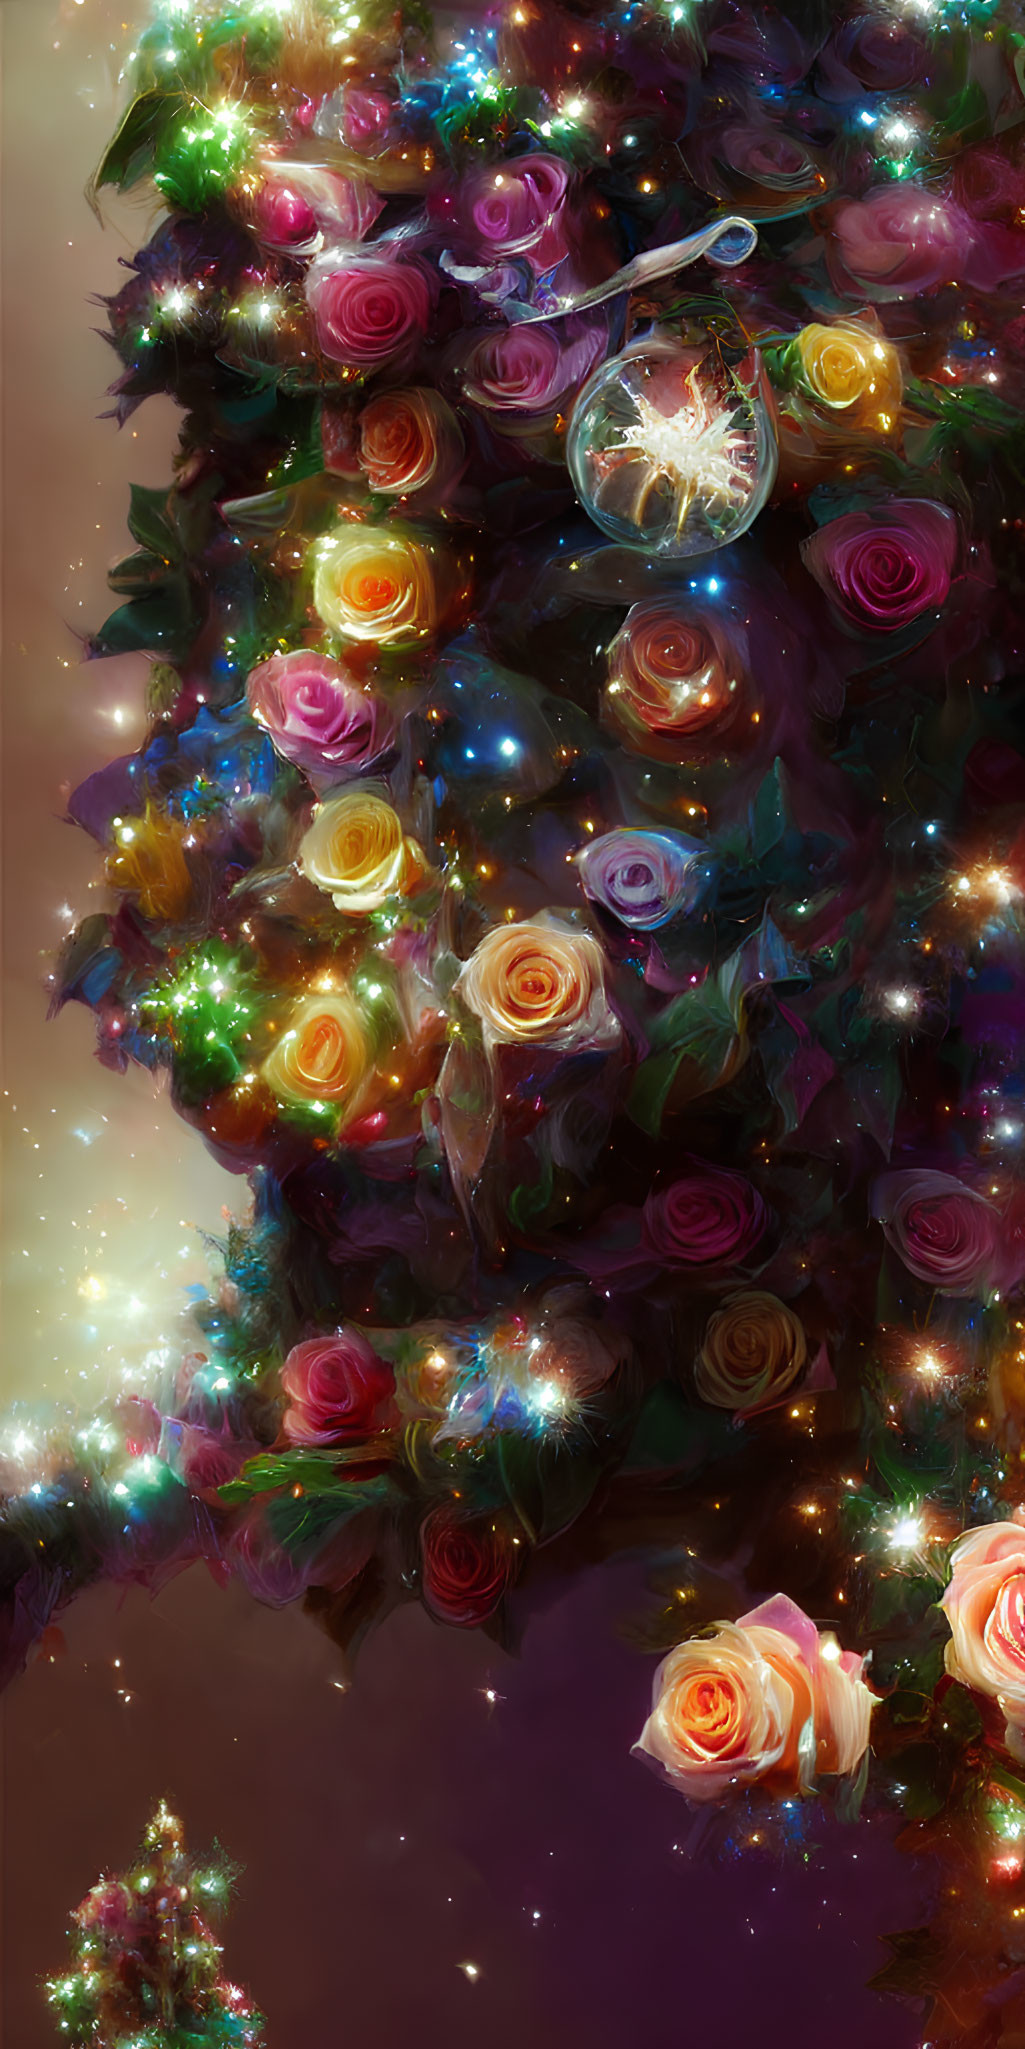 Colorful Roses Digital Art with Shimmering Lights & Sparkling Effects